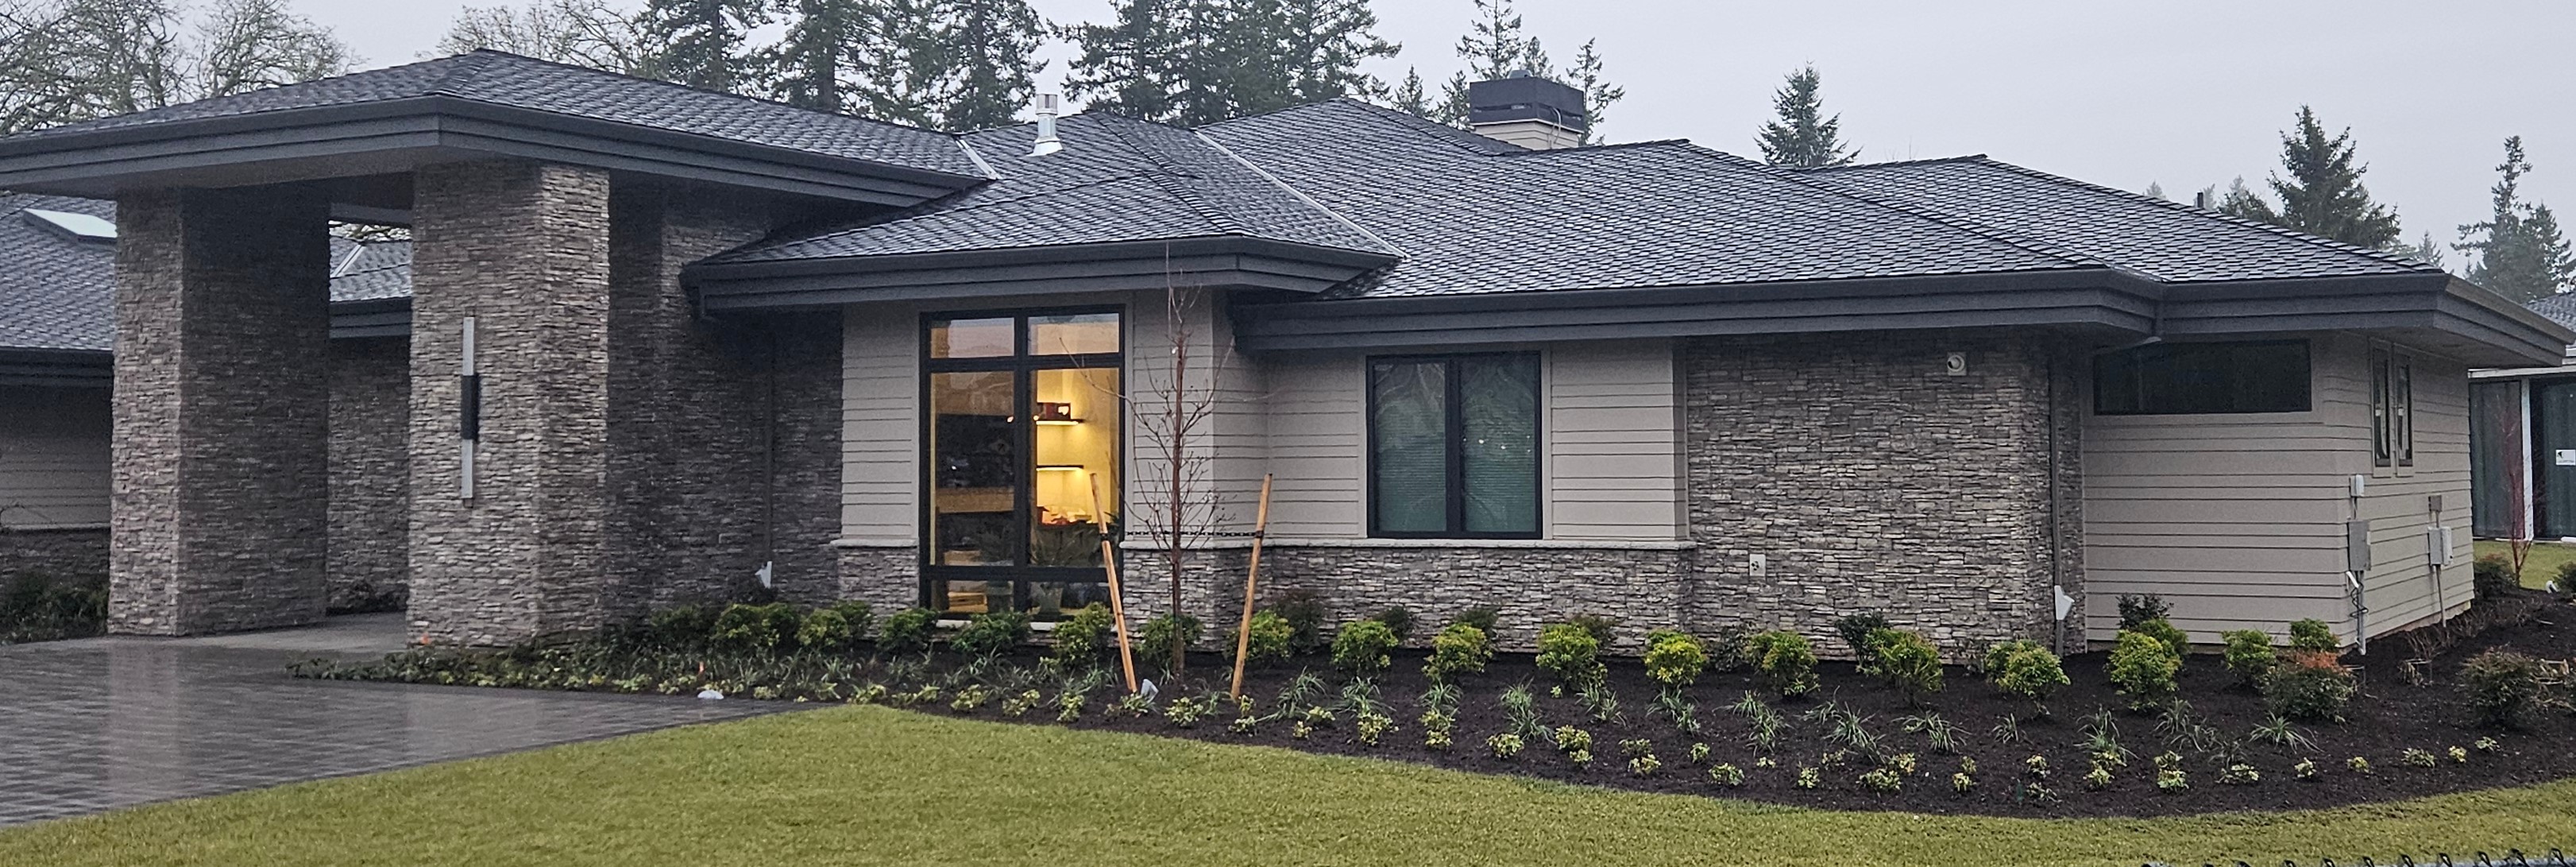 Top Quality Stone Masonry Installed in Wilsonville, OR 